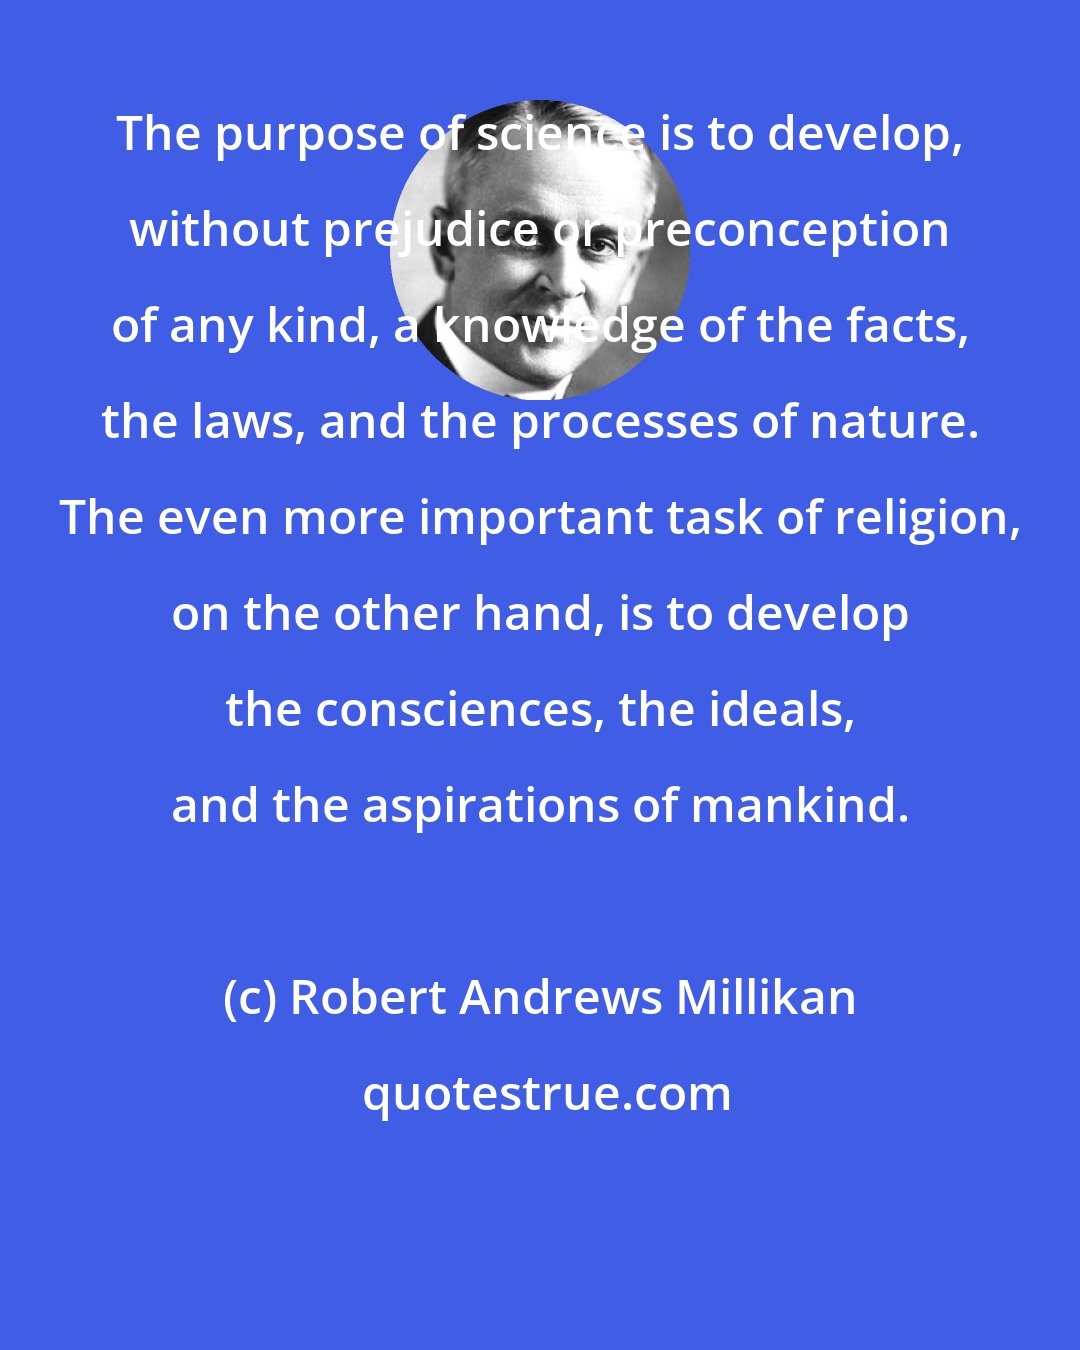 Robert Andrews Millikan: The purpose of science is to develop, without prejudice or preconception of any kind, a knowledge of the facts, the laws, and the processes of nature. The even more important task of religion, on the other hand, is to develop the consciences, the ideals, and the aspirations of mankind.